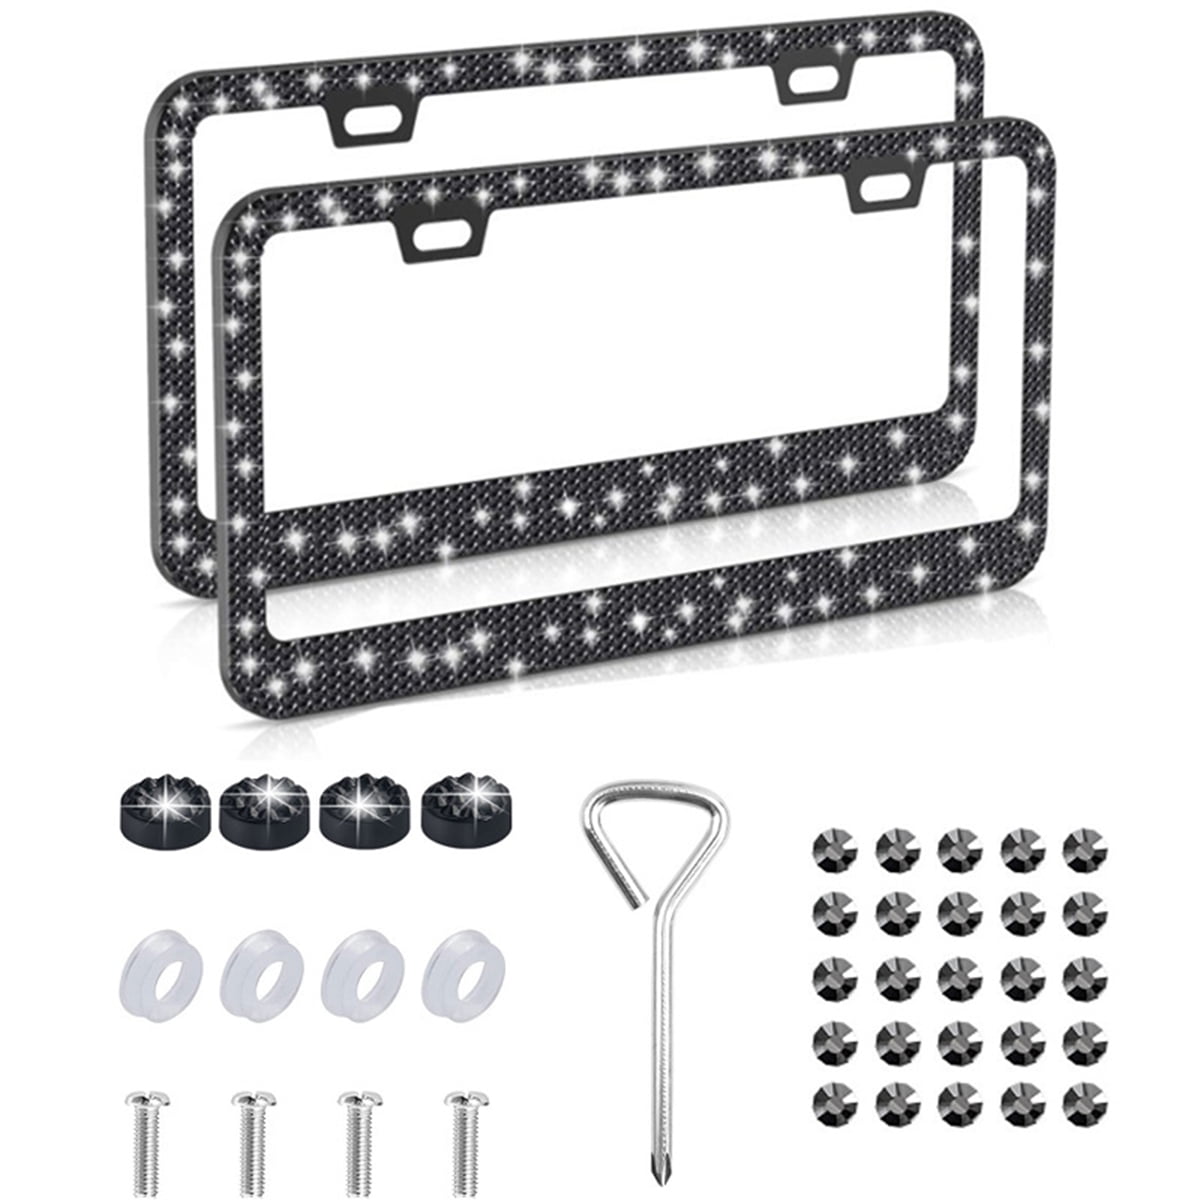 2X Bling Chrom License Plate Frame Metal Stainless Screws For Front And back